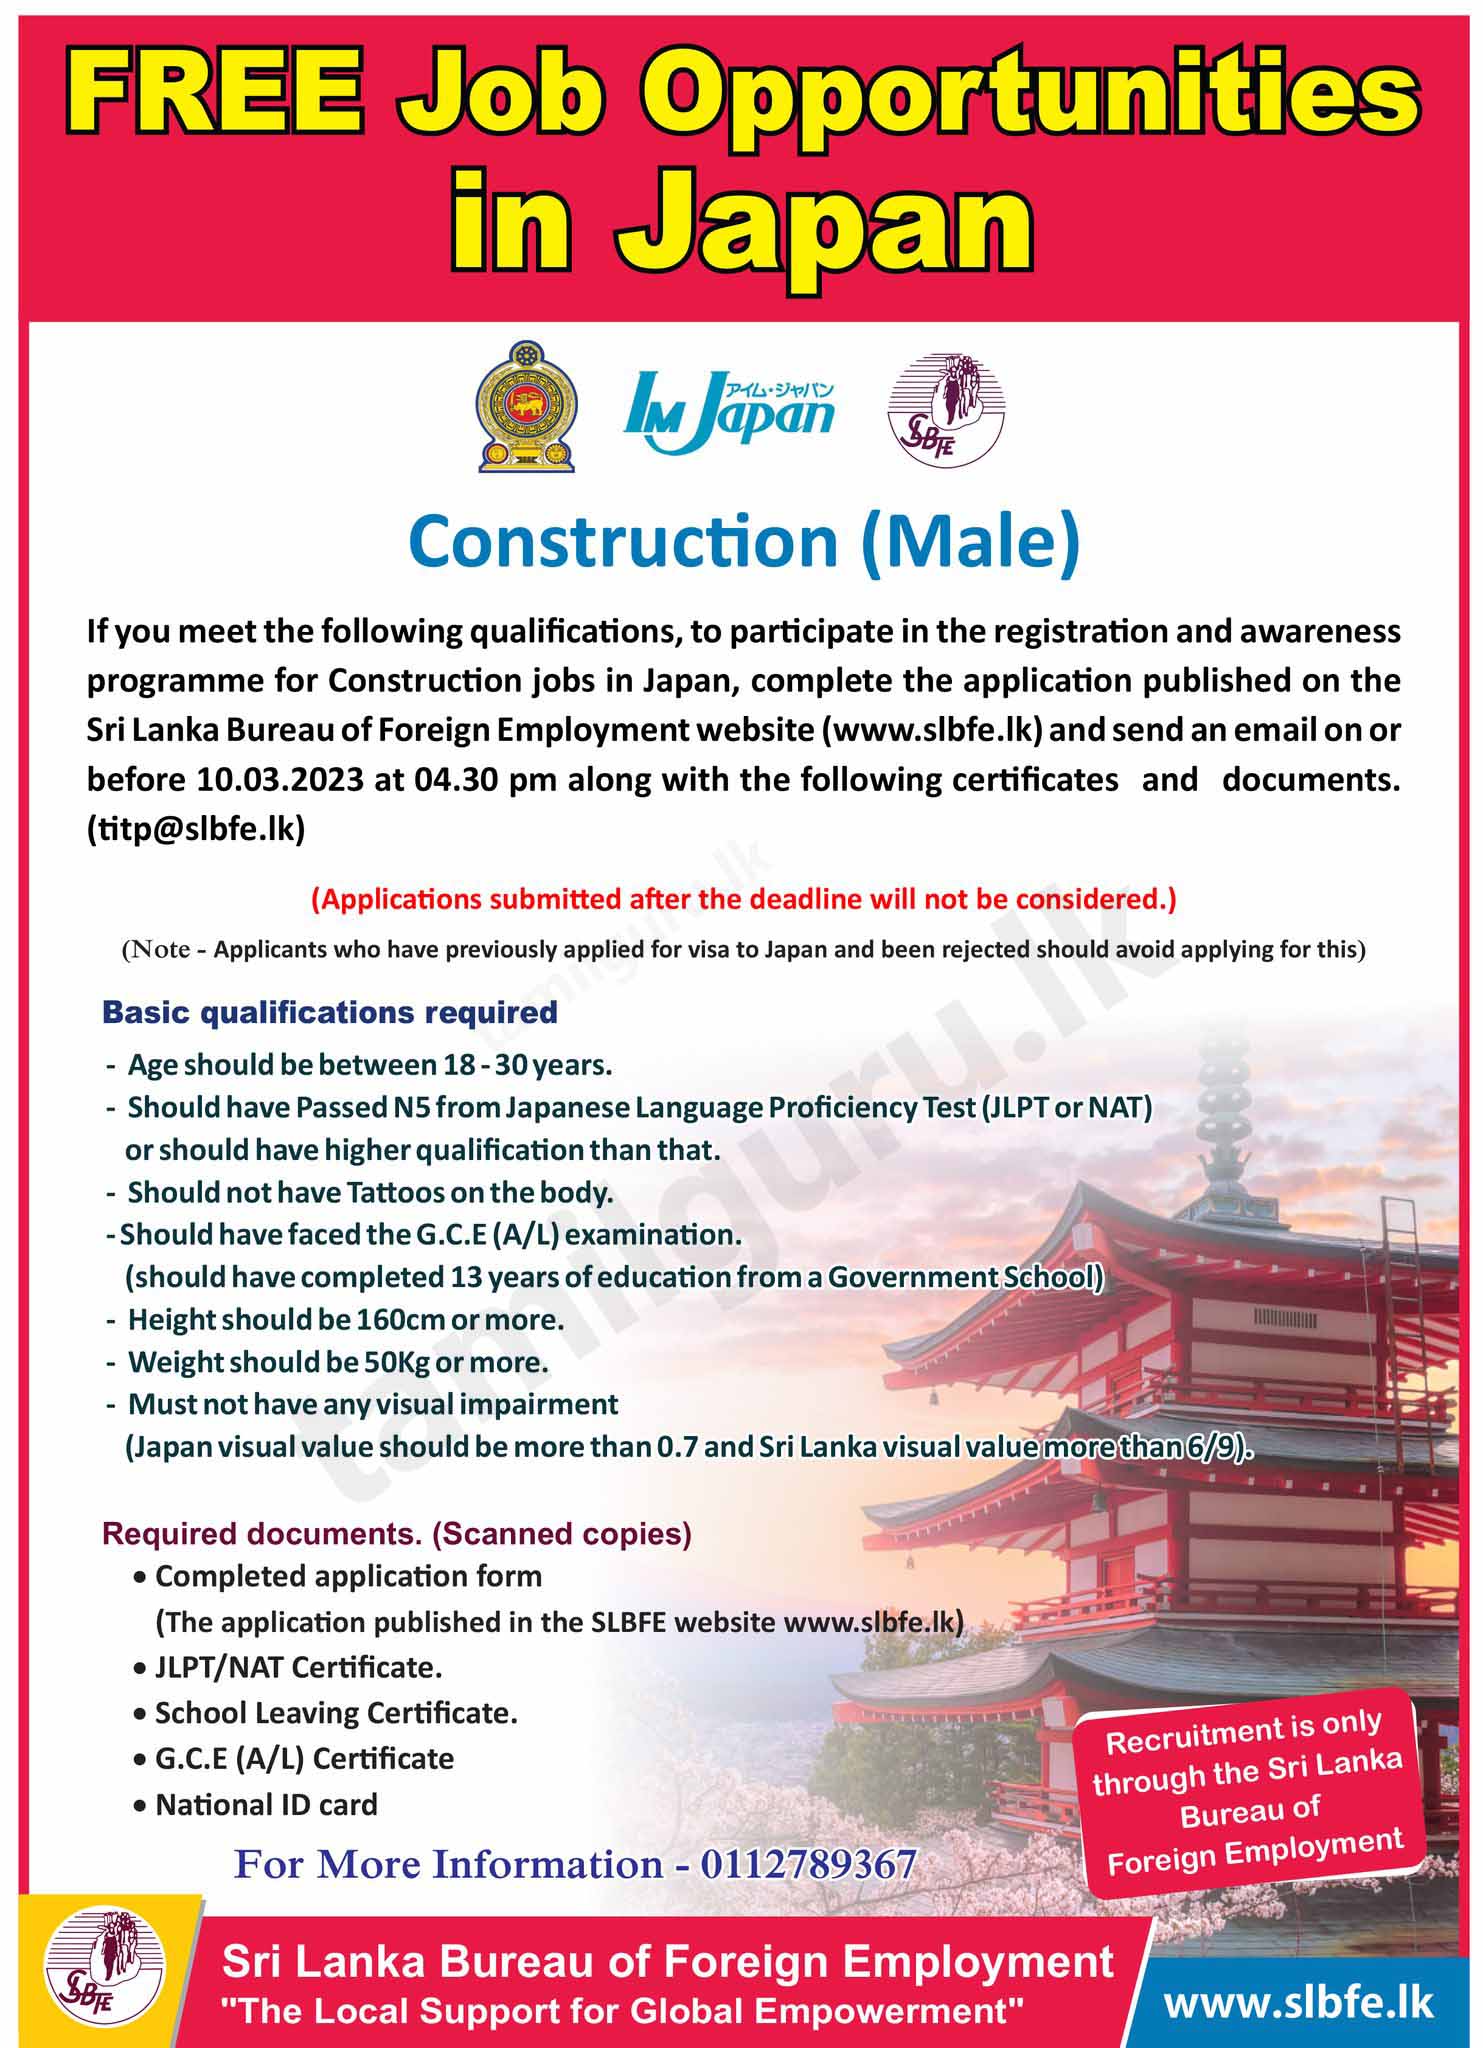 Construction (Male) Job Opportunities (Vacancies) in Japan 2023 - Sri Lanka Bureau of Foreign Employment (SLBFE)